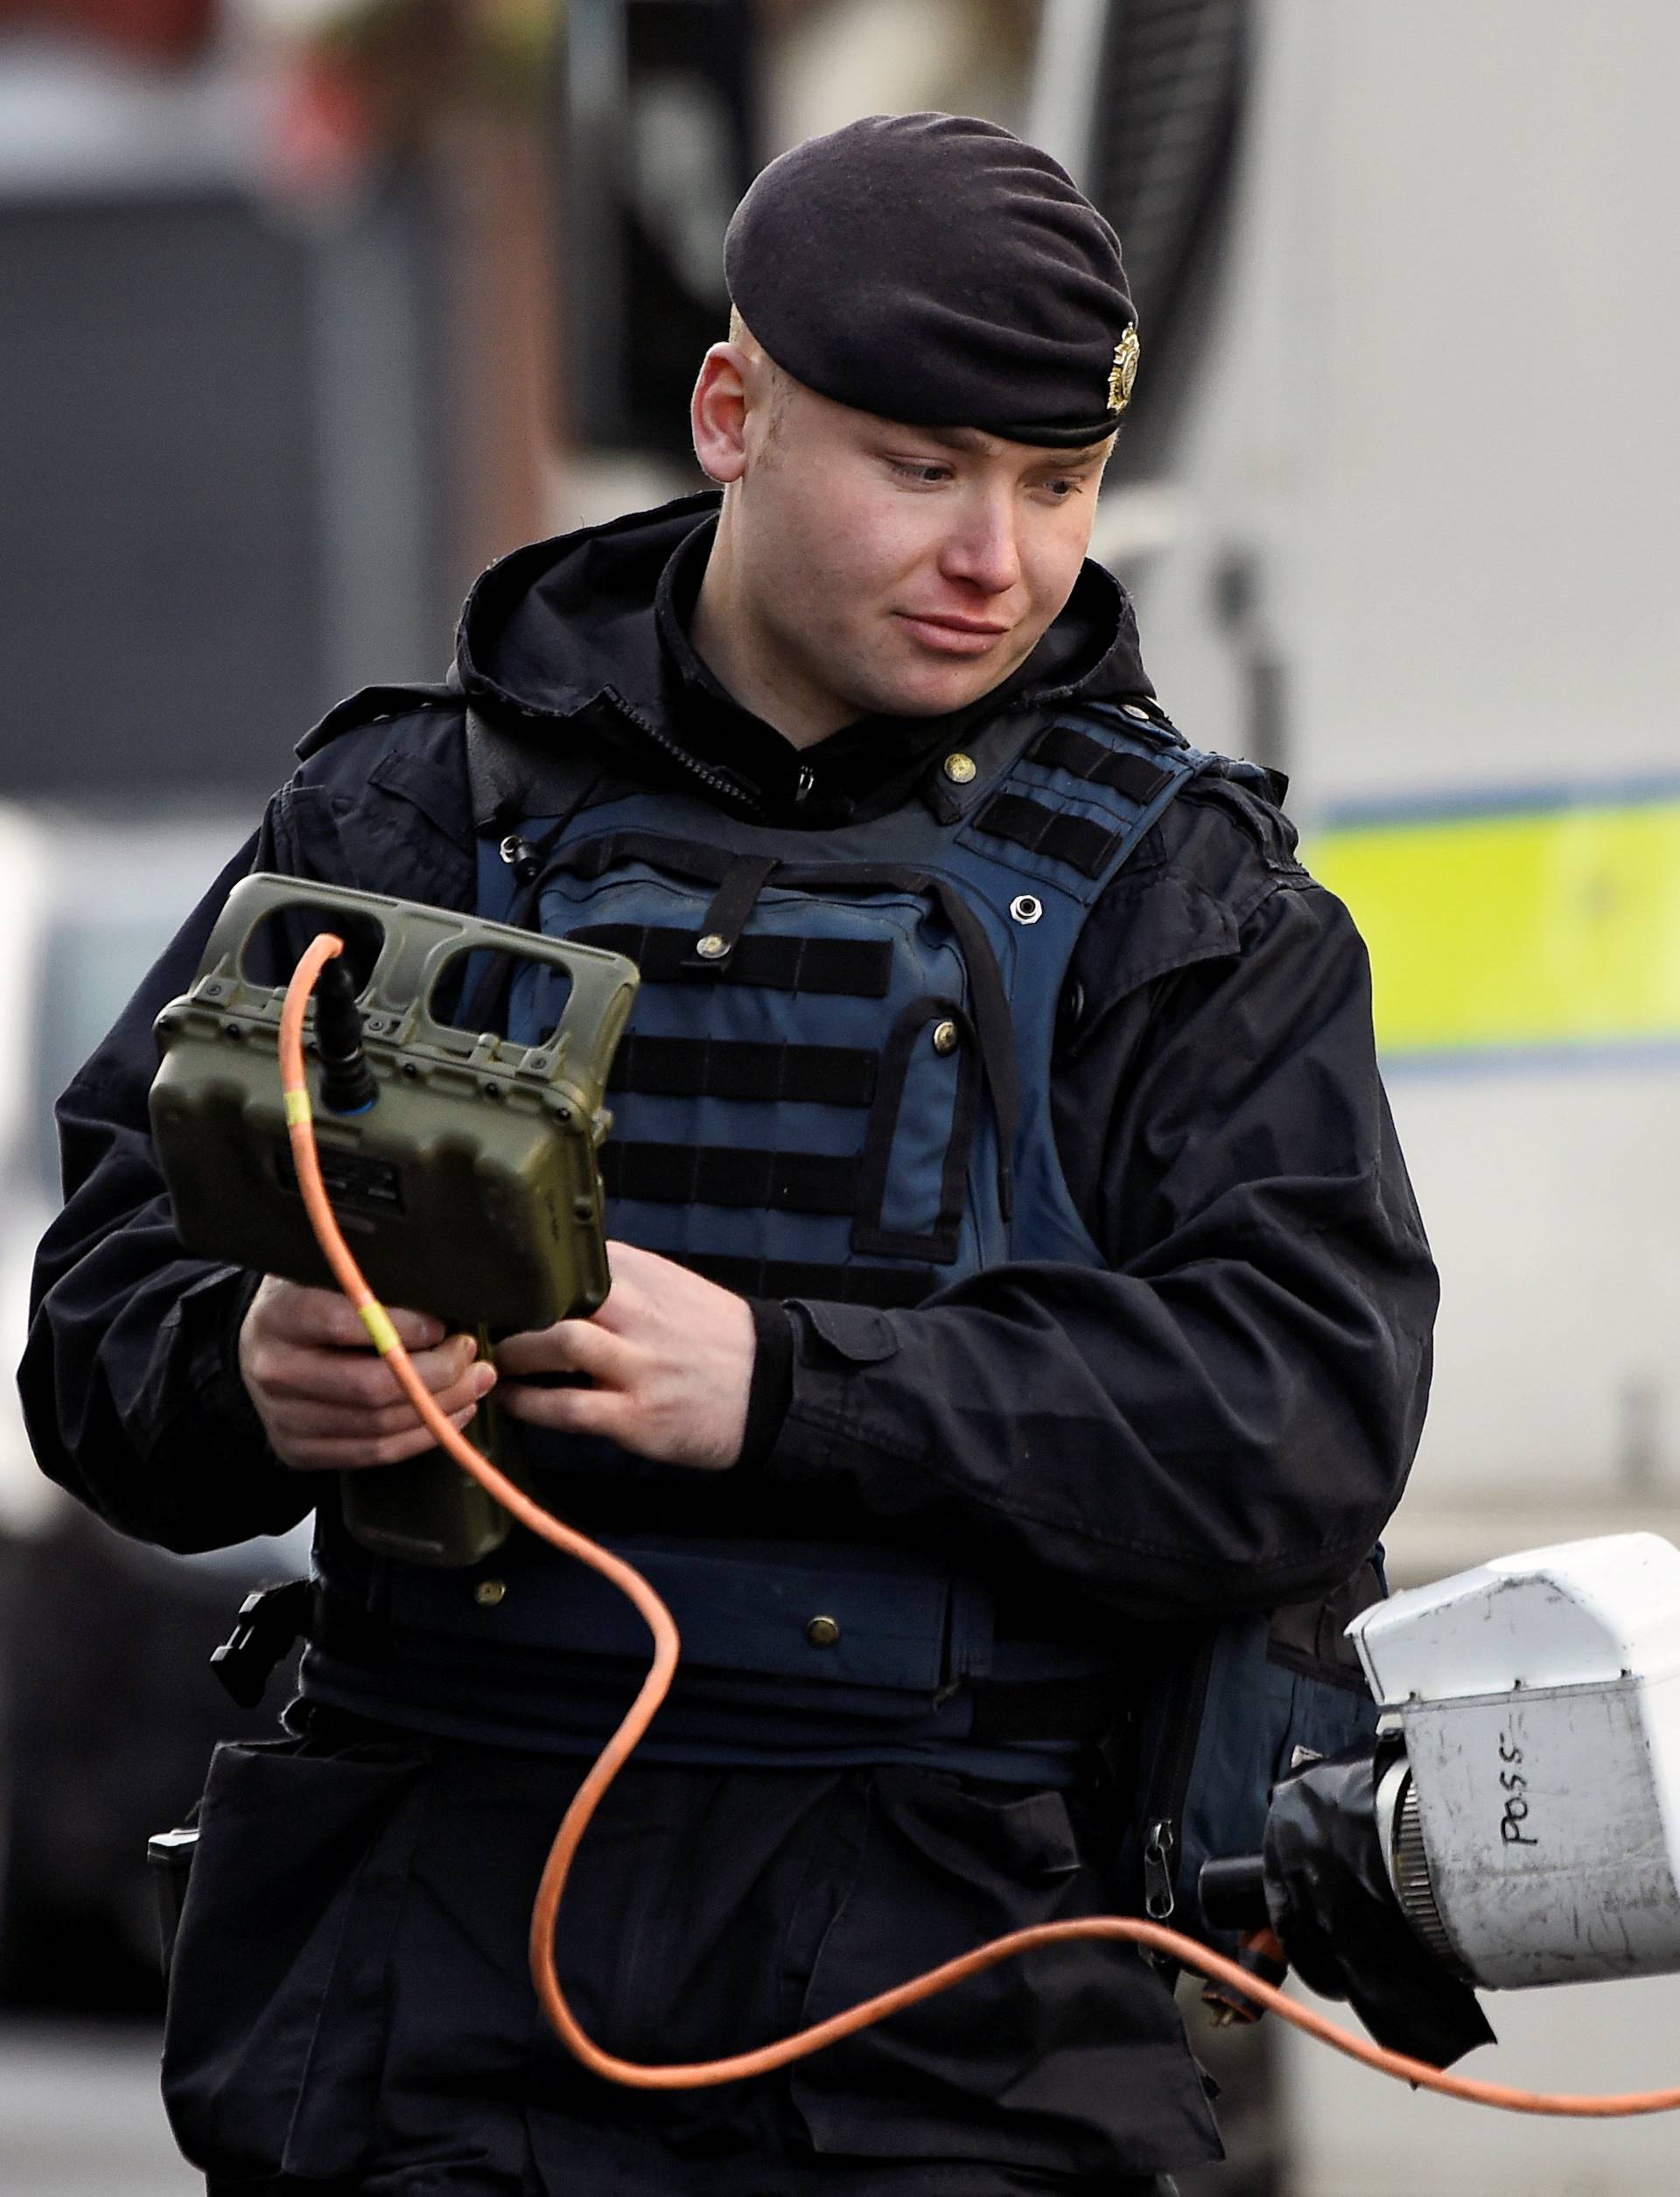 Soldier deploys a mechanical bomb defuser at the scene of a suspected car bomb in Londonderry